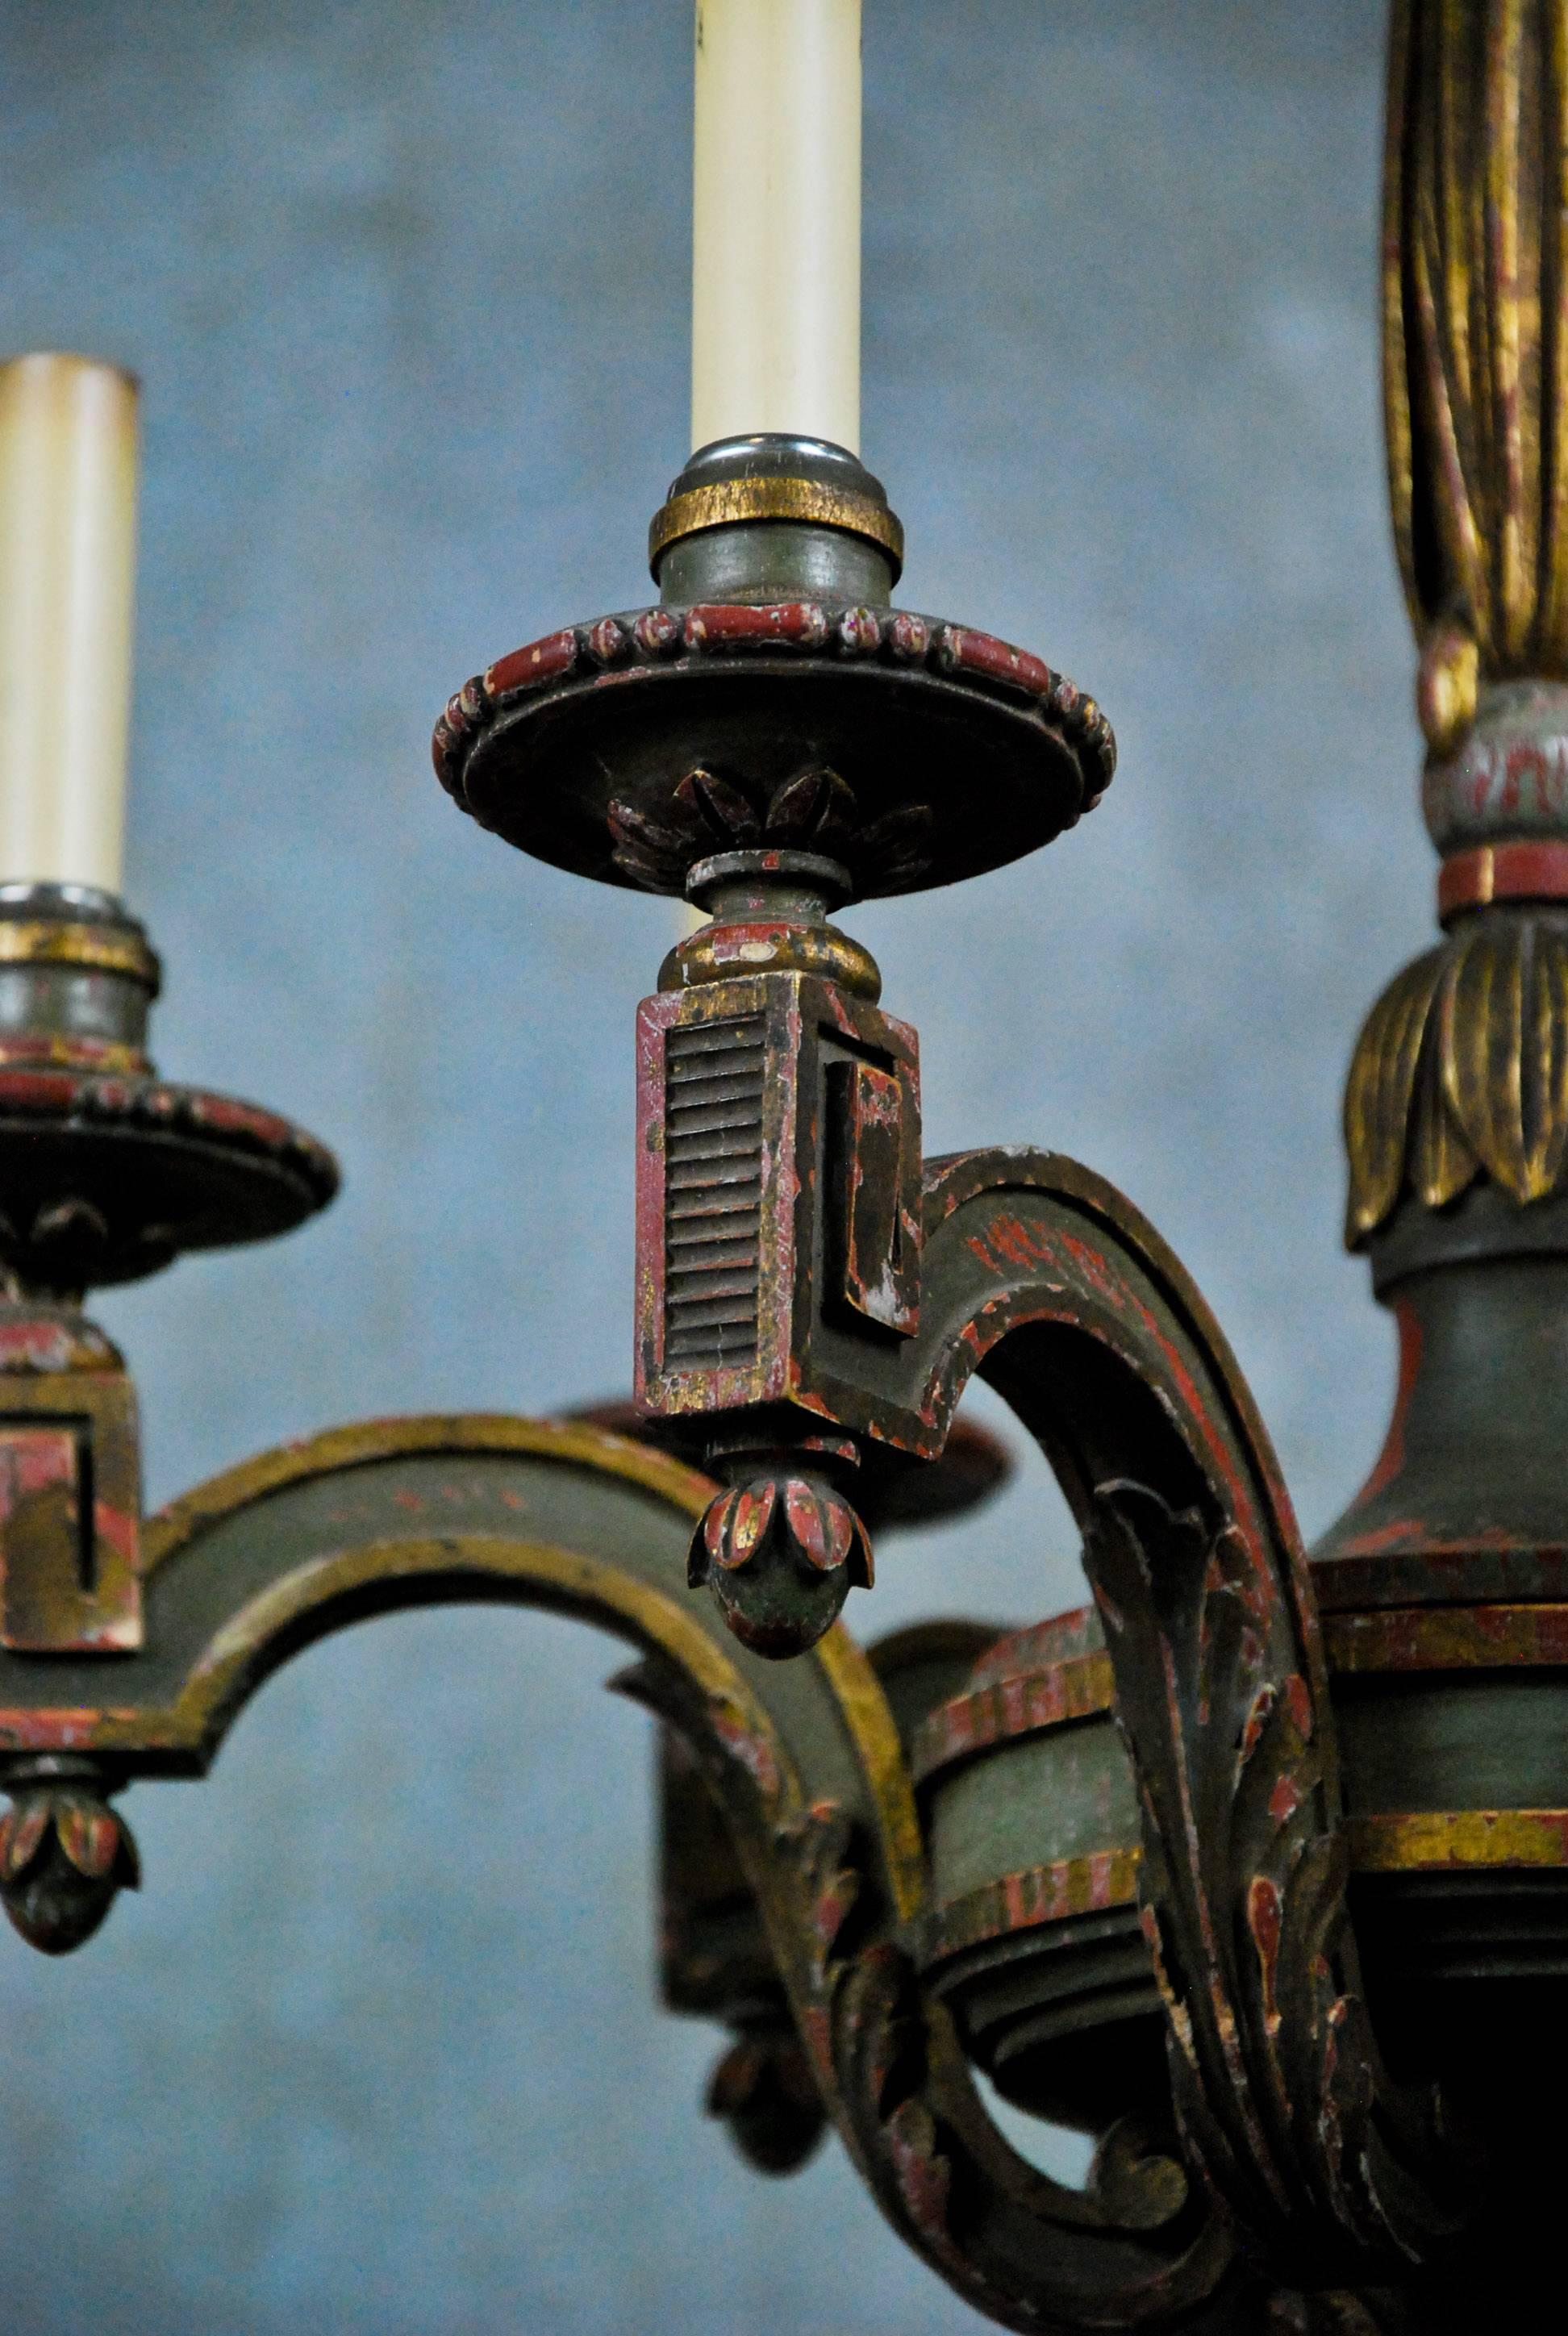 Polychromed and partial gilded chandelier, six carved wood candle arms carved with acanthus leaf and strong Greek key influence, each arm is anchored by decorative finials.
Chandelier has been electrified and csa approved.